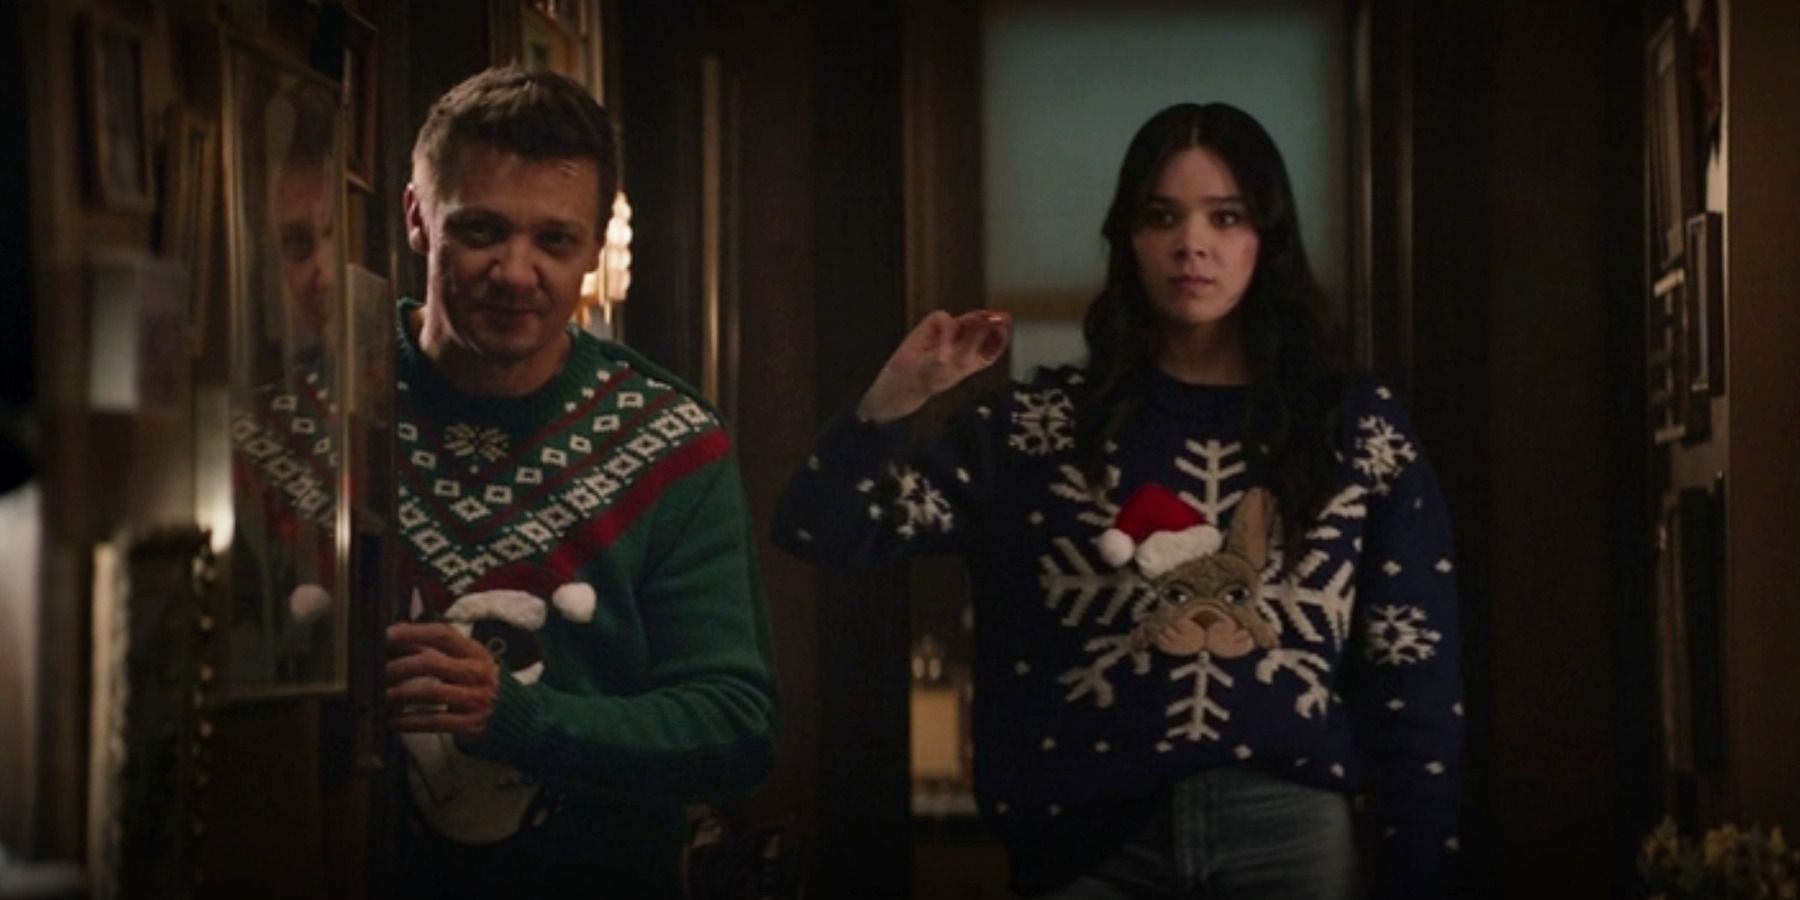 Clint Barton and Kate Bishop in a pair of Christmas sweaters in Hawkeye episode 4